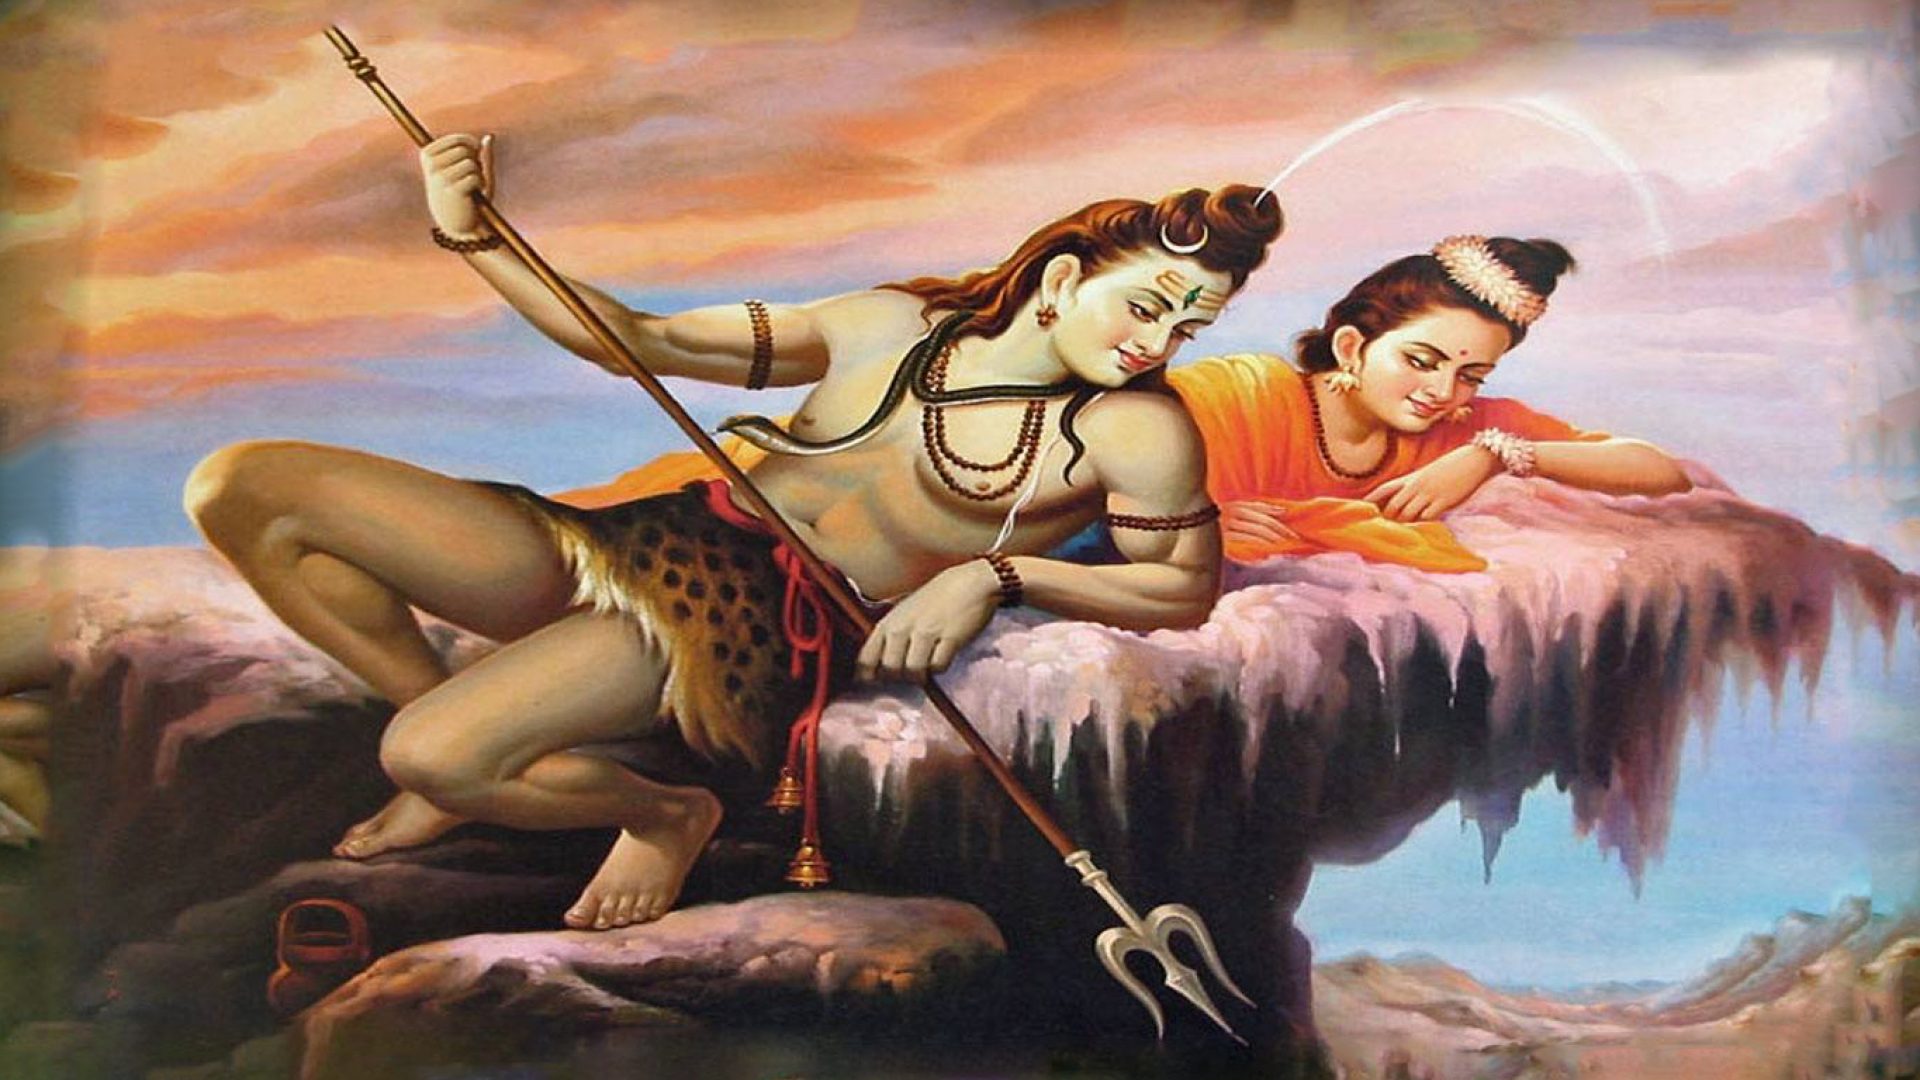 Beautiful Shiv Parvati Images Photos and HD Wallpapers for Free Download   Shiva Shiva parvati images Lord shiva painting